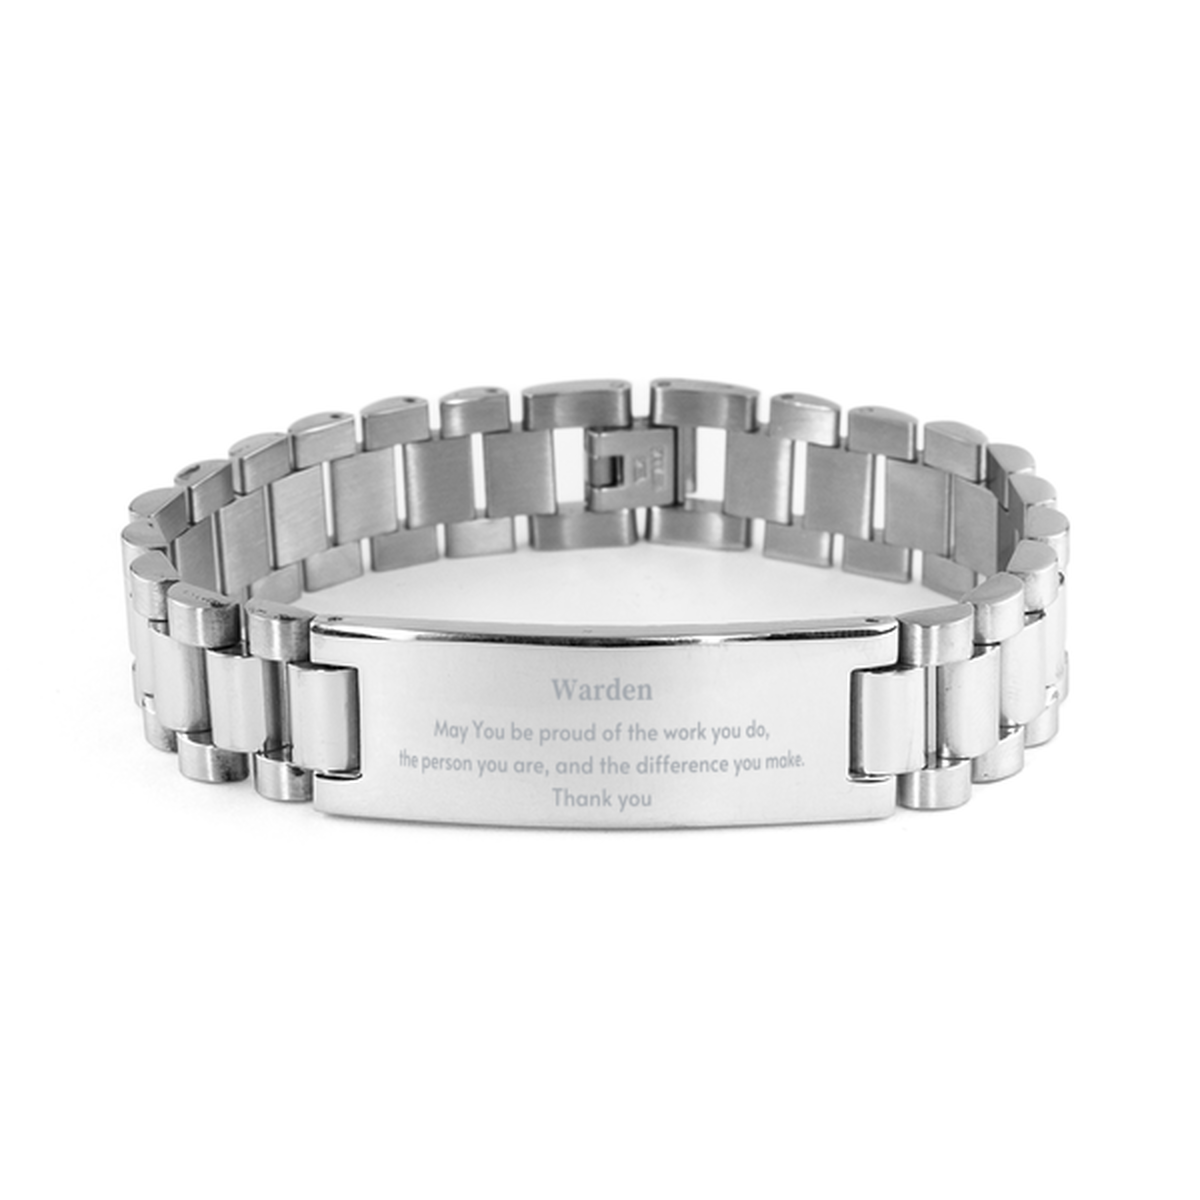 Heartwarming Ladder Stainless Steel Bracelet Retirement Coworkers Gifts for Warden, Warden May You be proud of the work you do, the person you are Gifts for Boss Men Women Friends